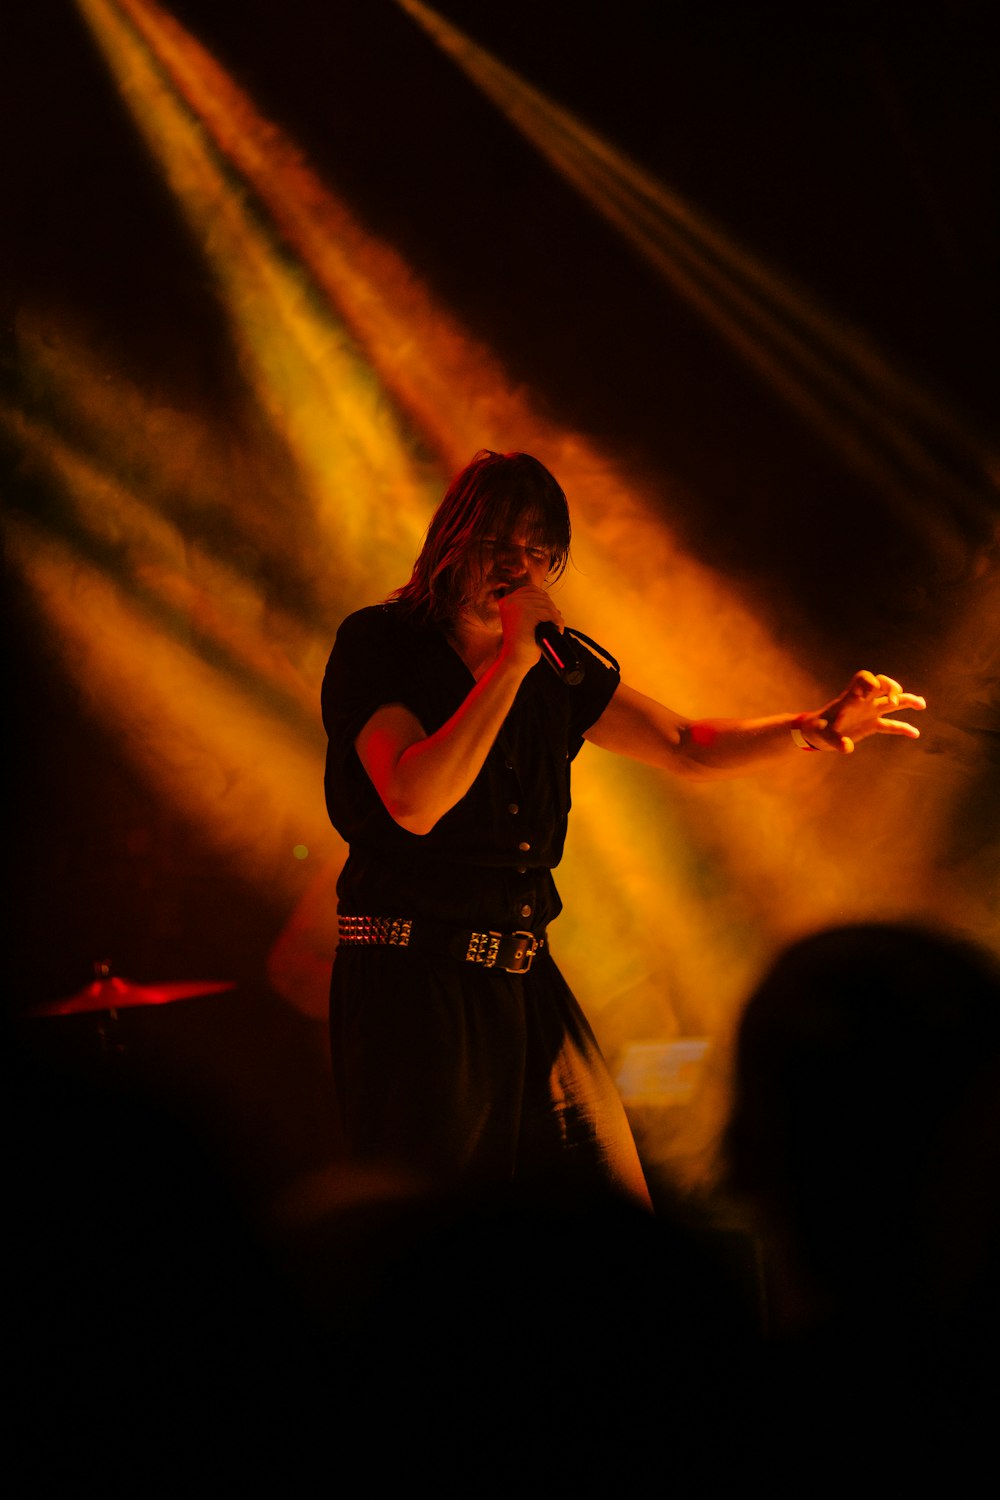 man holding microphone standing on stage with lightings